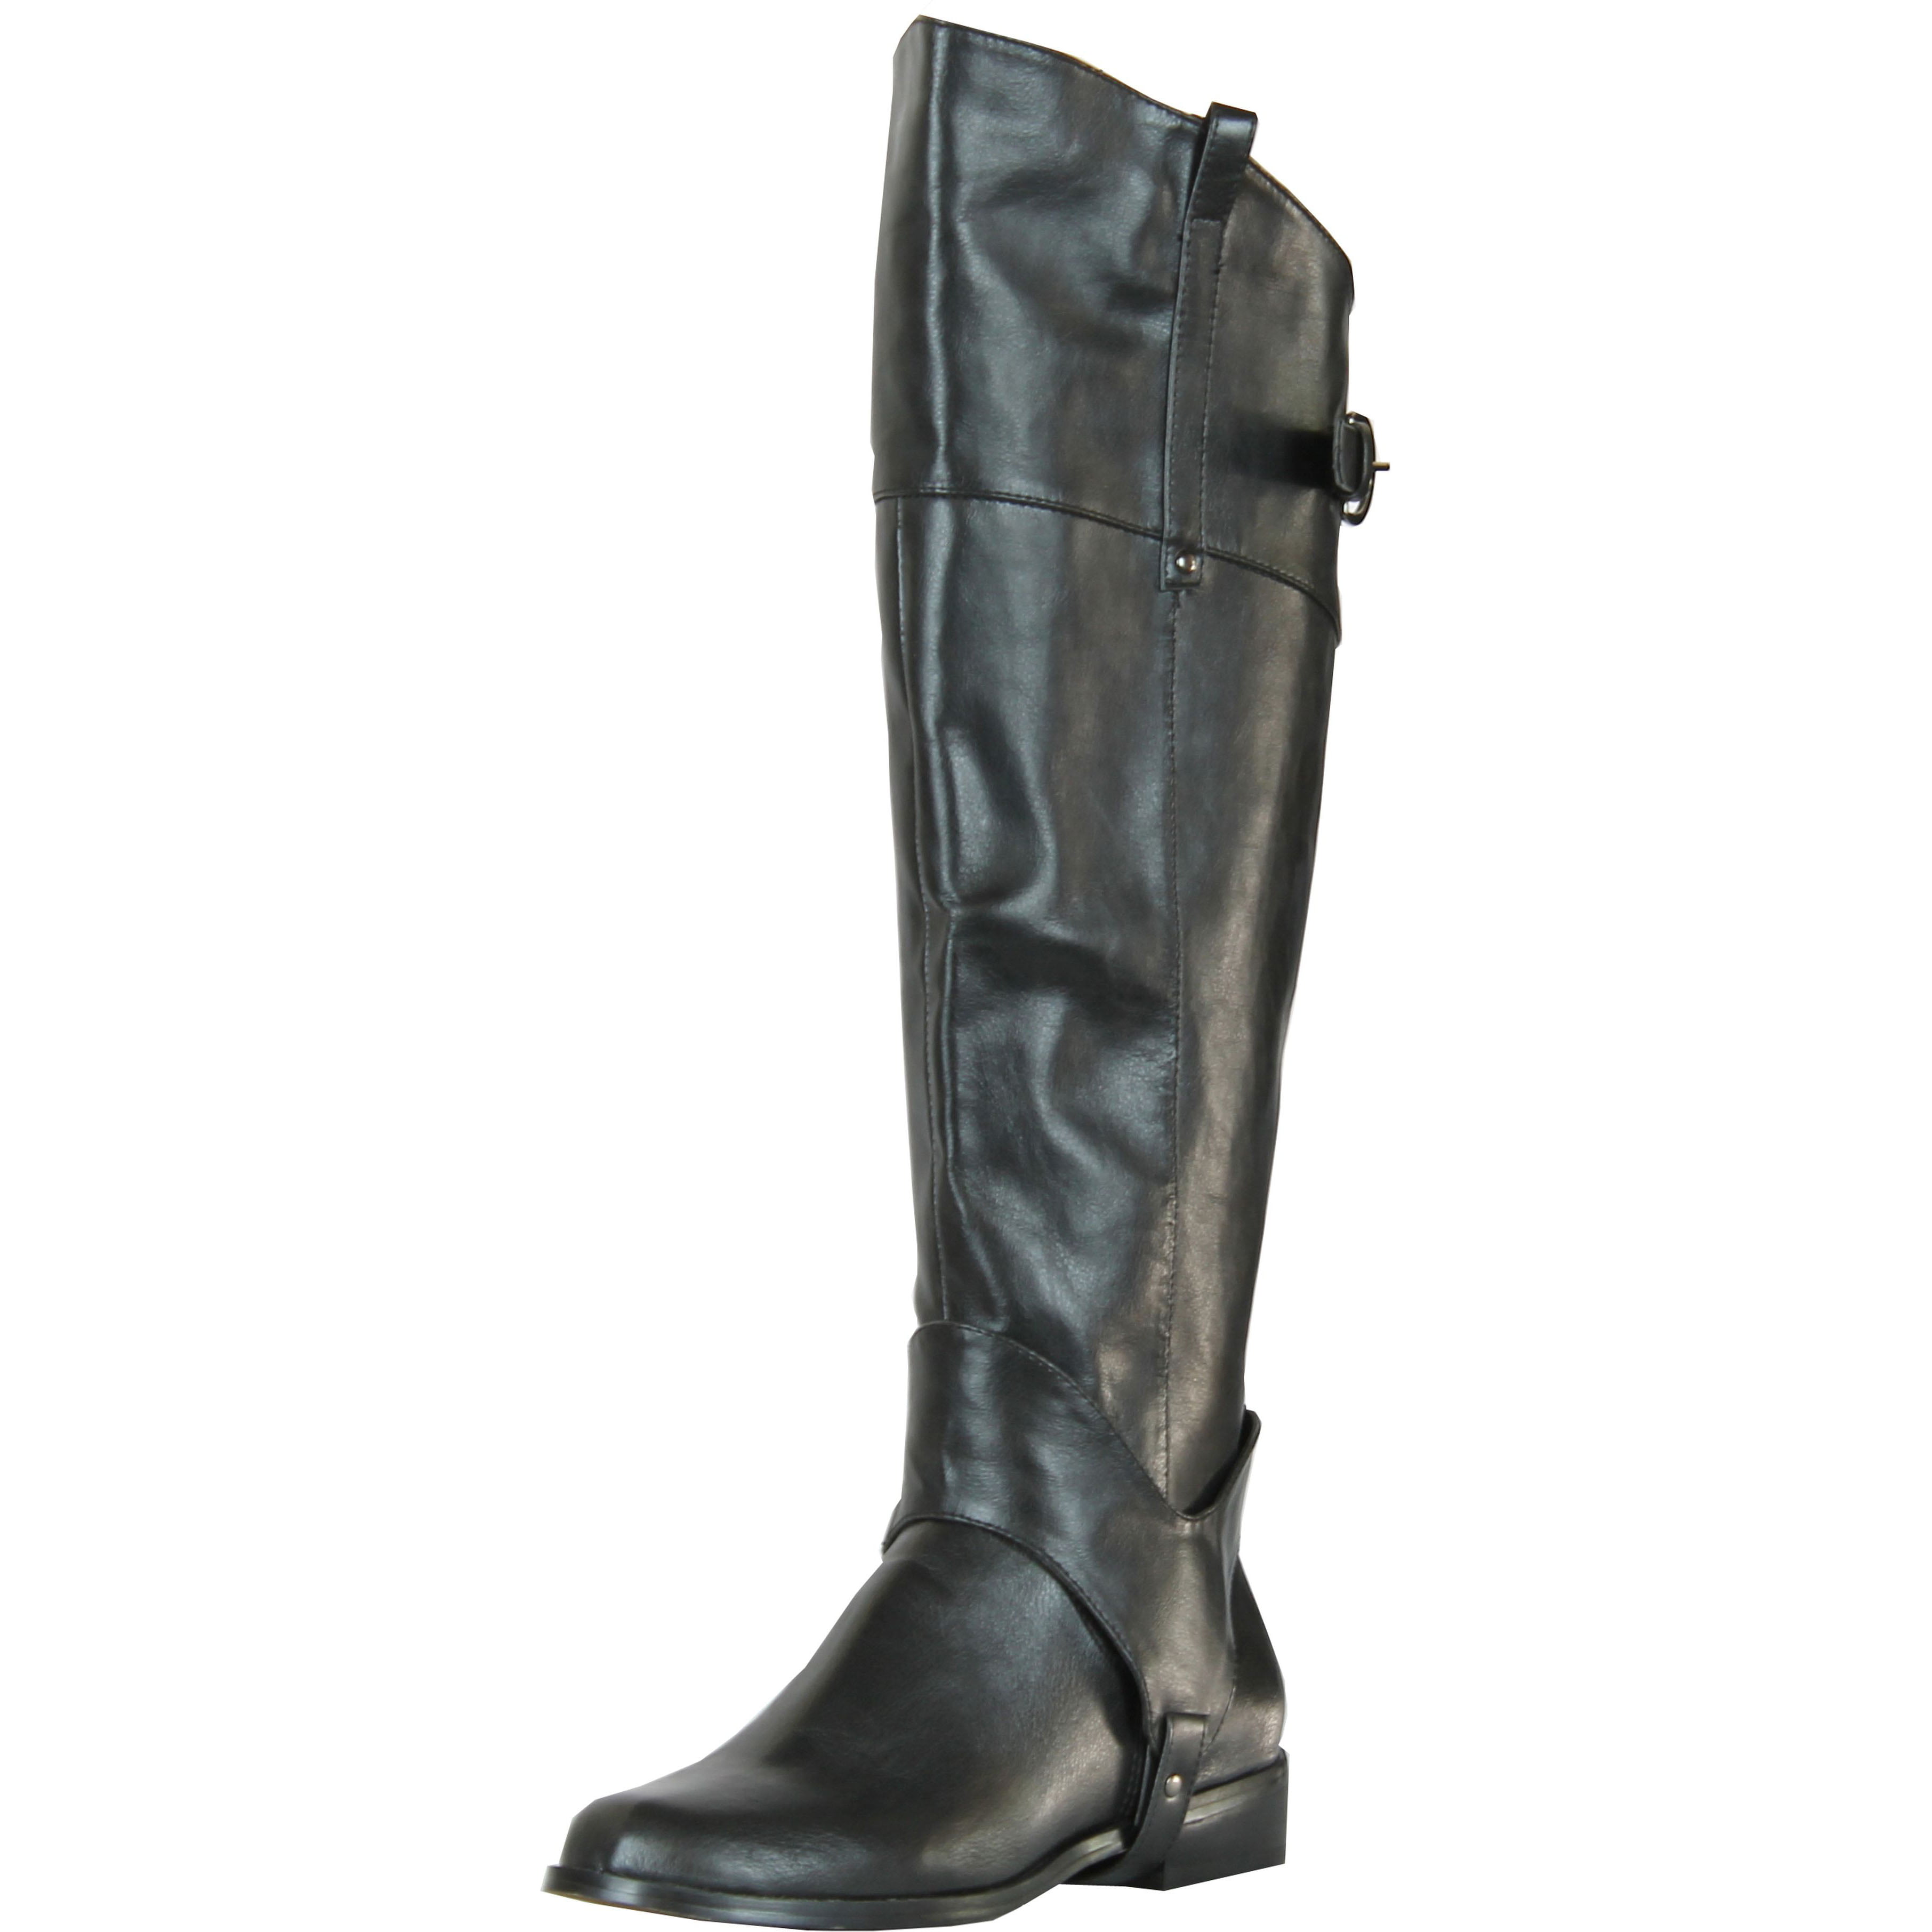 Restricted Womens Derby Fashion Riding Boots, Black., 7 - Walmart.com